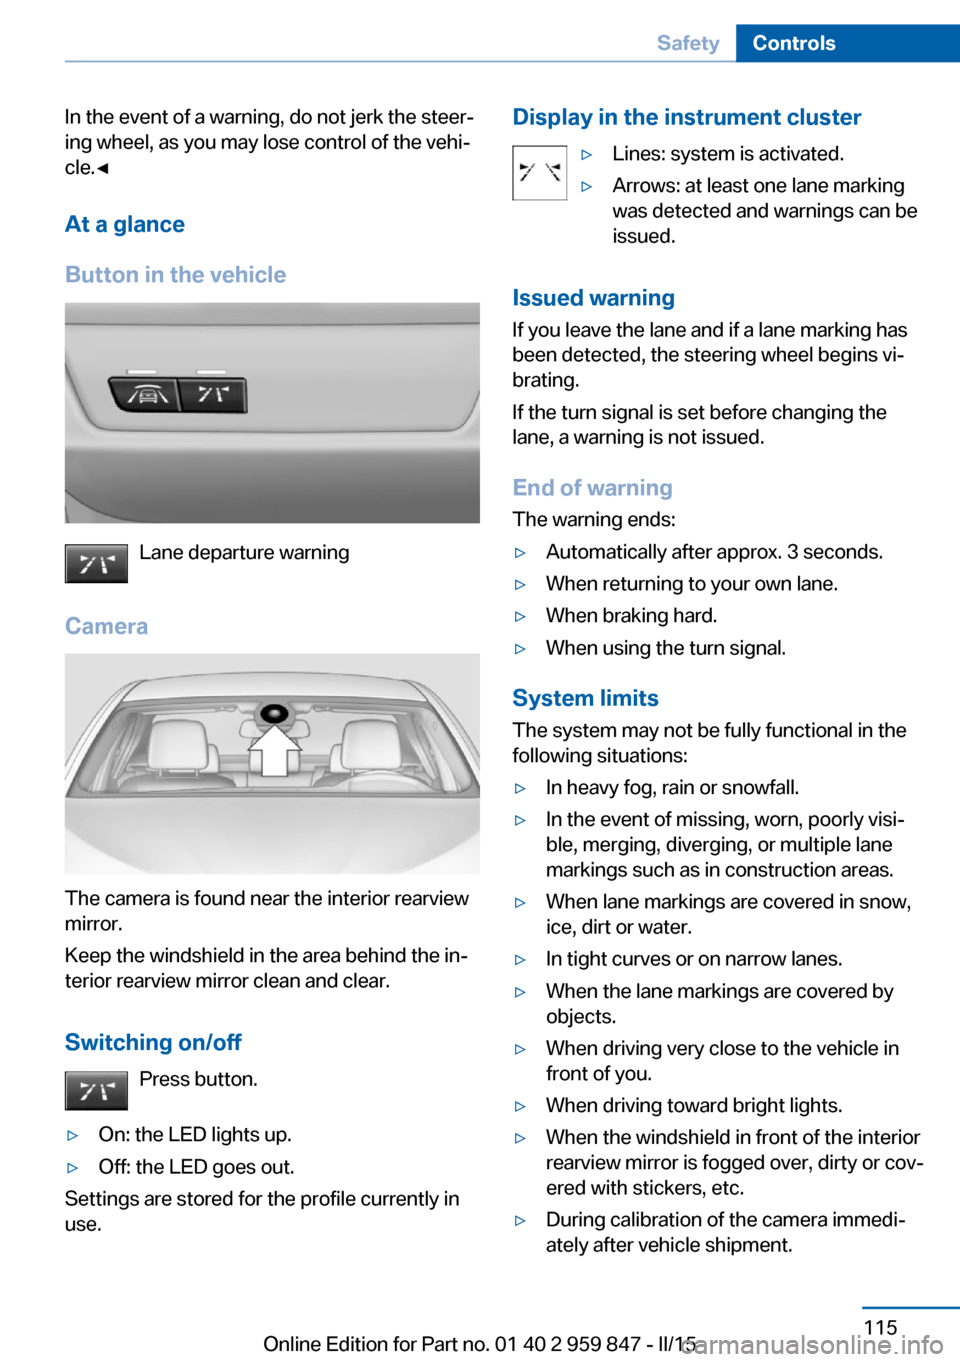 BMW 2 SERIES CONVERTIBLE 2015 F23 User Guide In the event of a warning, do not jerk the steer‐
ing wheel, as you may lose control of the vehi‐
cle.◀
At a glance
Button in the vehicle
Lane departure warning
Camera
The camera is found near t